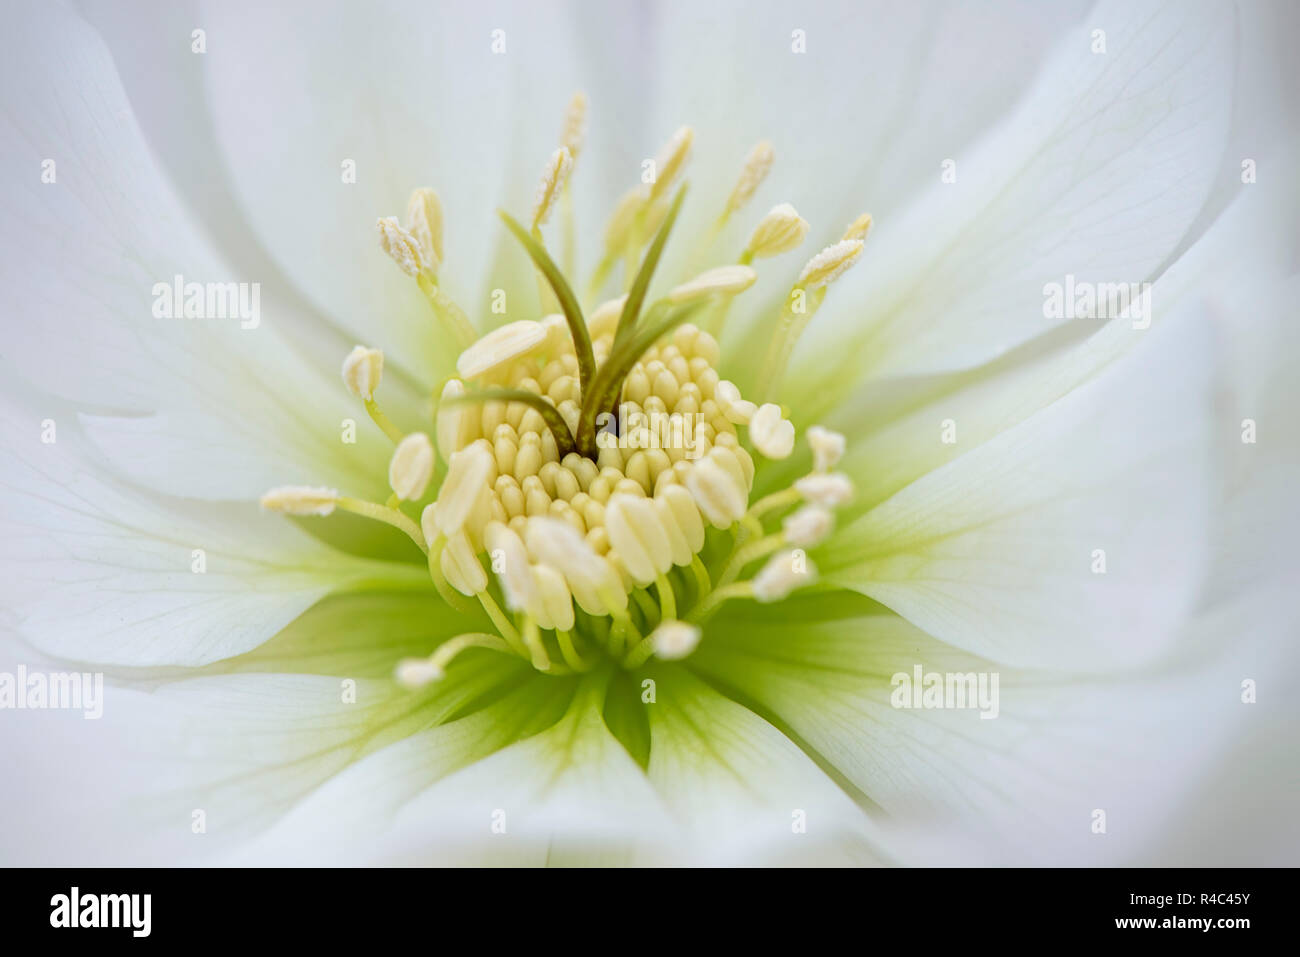 Close-up image of the beautiful double white, spring flowering Hellebore flower also known as the Lenten or Christmas Rose Stock Photo